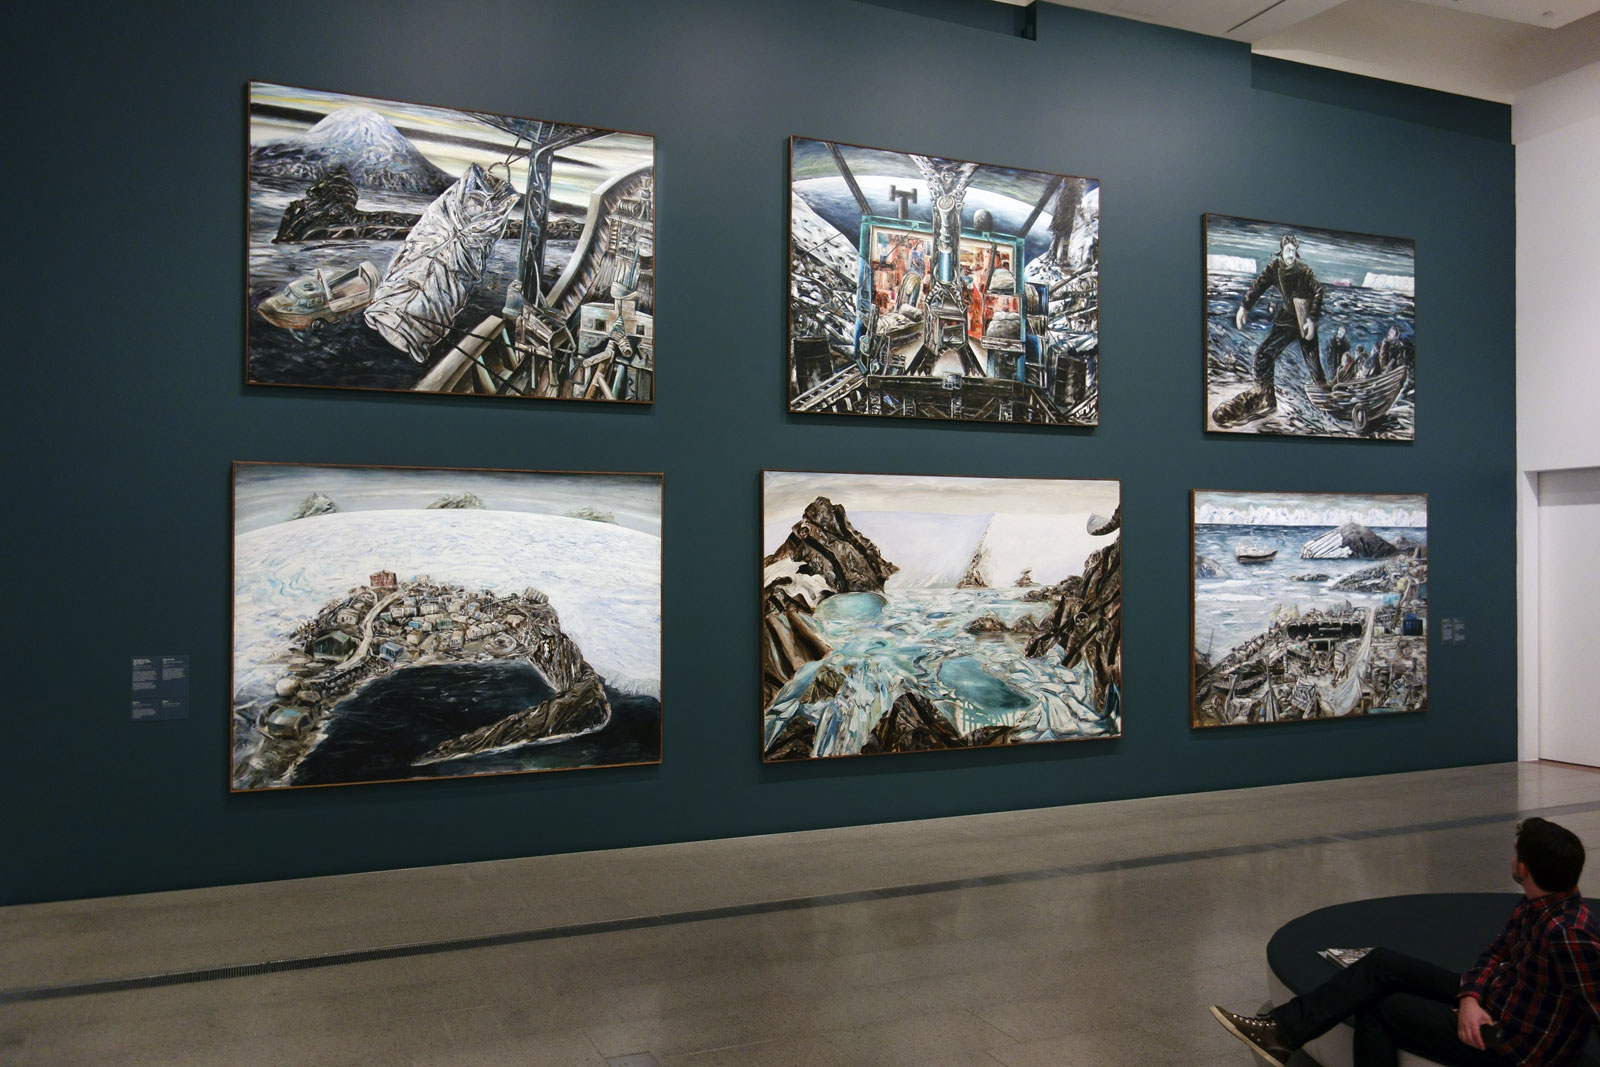 Installation view of the exhibition 'Jan Senbergs: Observation – Imagination' at The Ian Potter Centre: NGV Australia showing in the bottom image at top left, 'Bea Maddock being lifted onto the Icebird – Heard Island' (1987); at top middle, 'Antarctic night' (1989); at bottom left, 'Mawson'; and at bottom middle, 'Platcha' (1987)